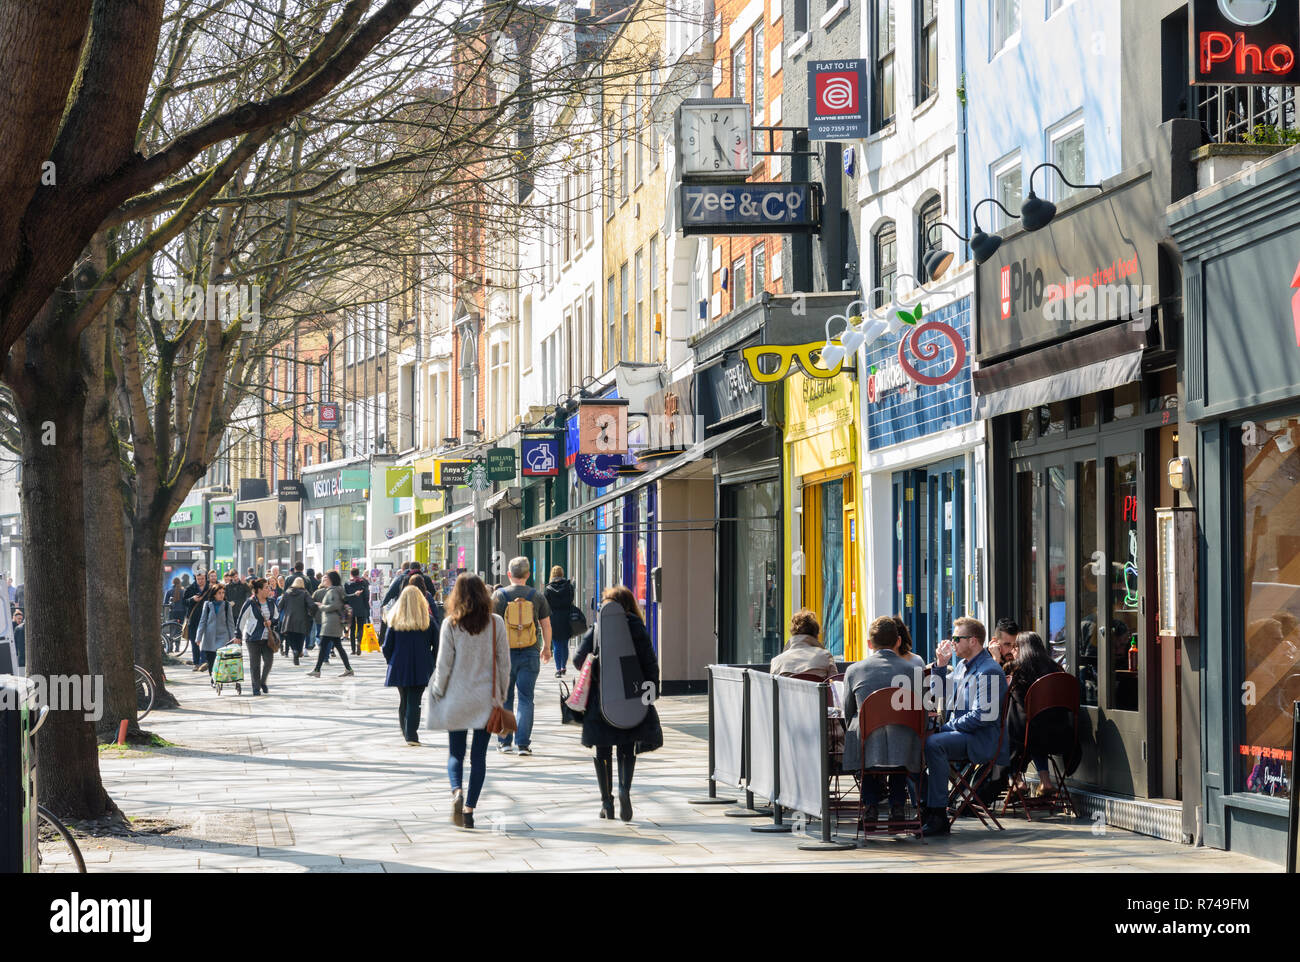 London, England, UK - March 27, 2017: Pedestrians and shoppers walk past traditional high street shops on Upper Street in Islington Angel, North Londo Stock Photo